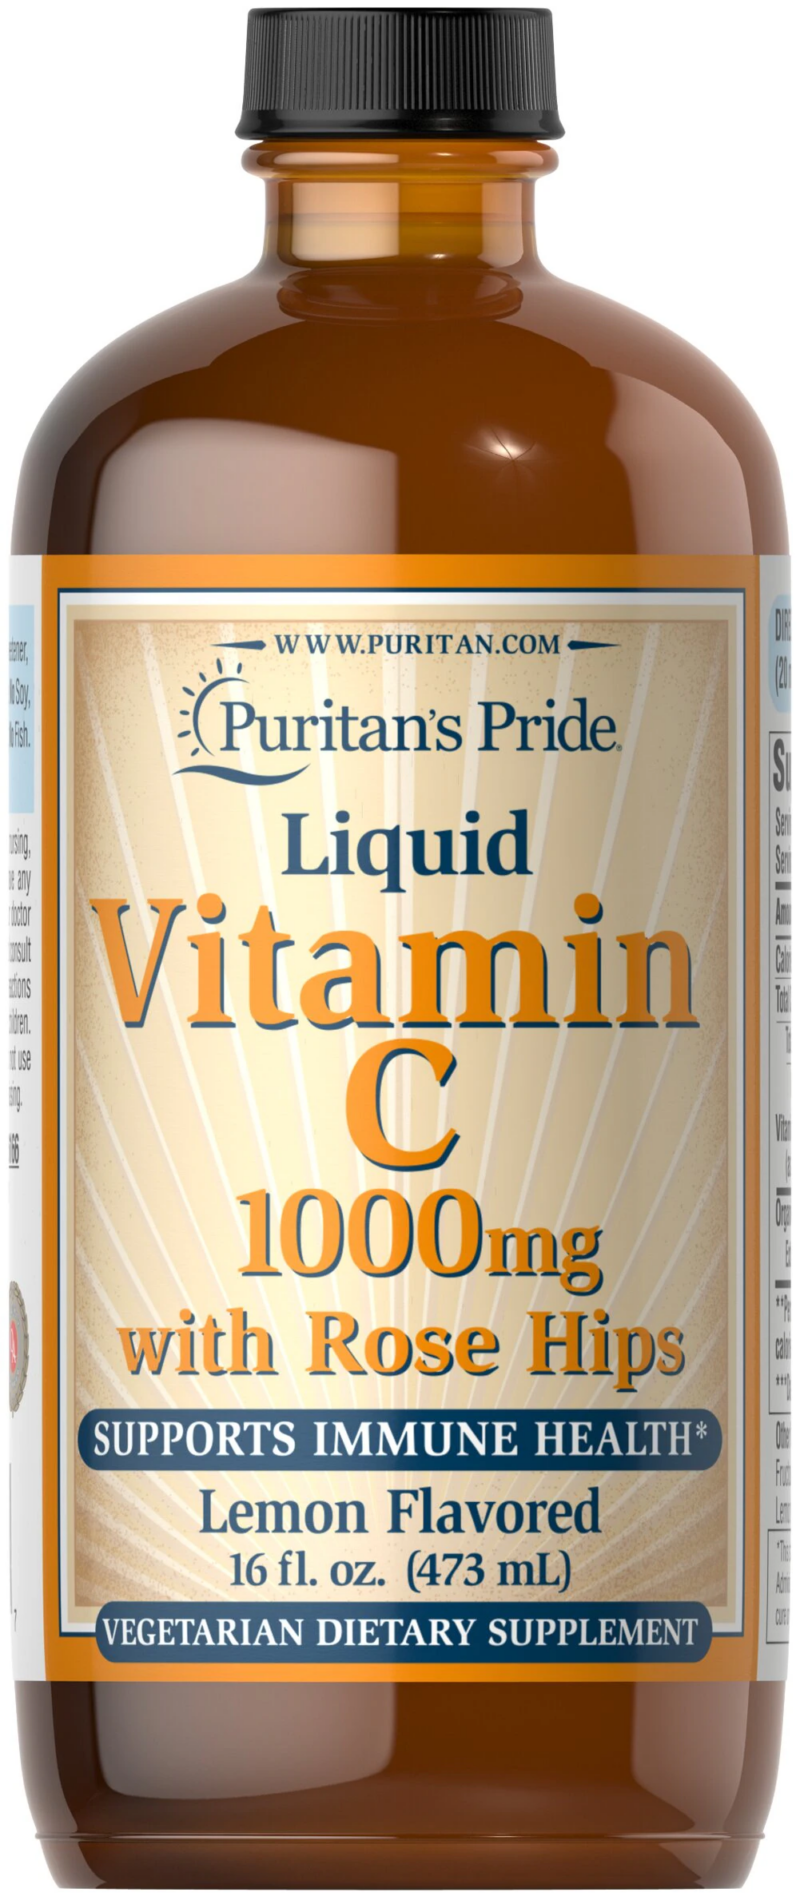 PURITAN'S PRIDE Liquid Vitamin C 1000mg with rose Hips | buy in Nigeria at buybetter.ng